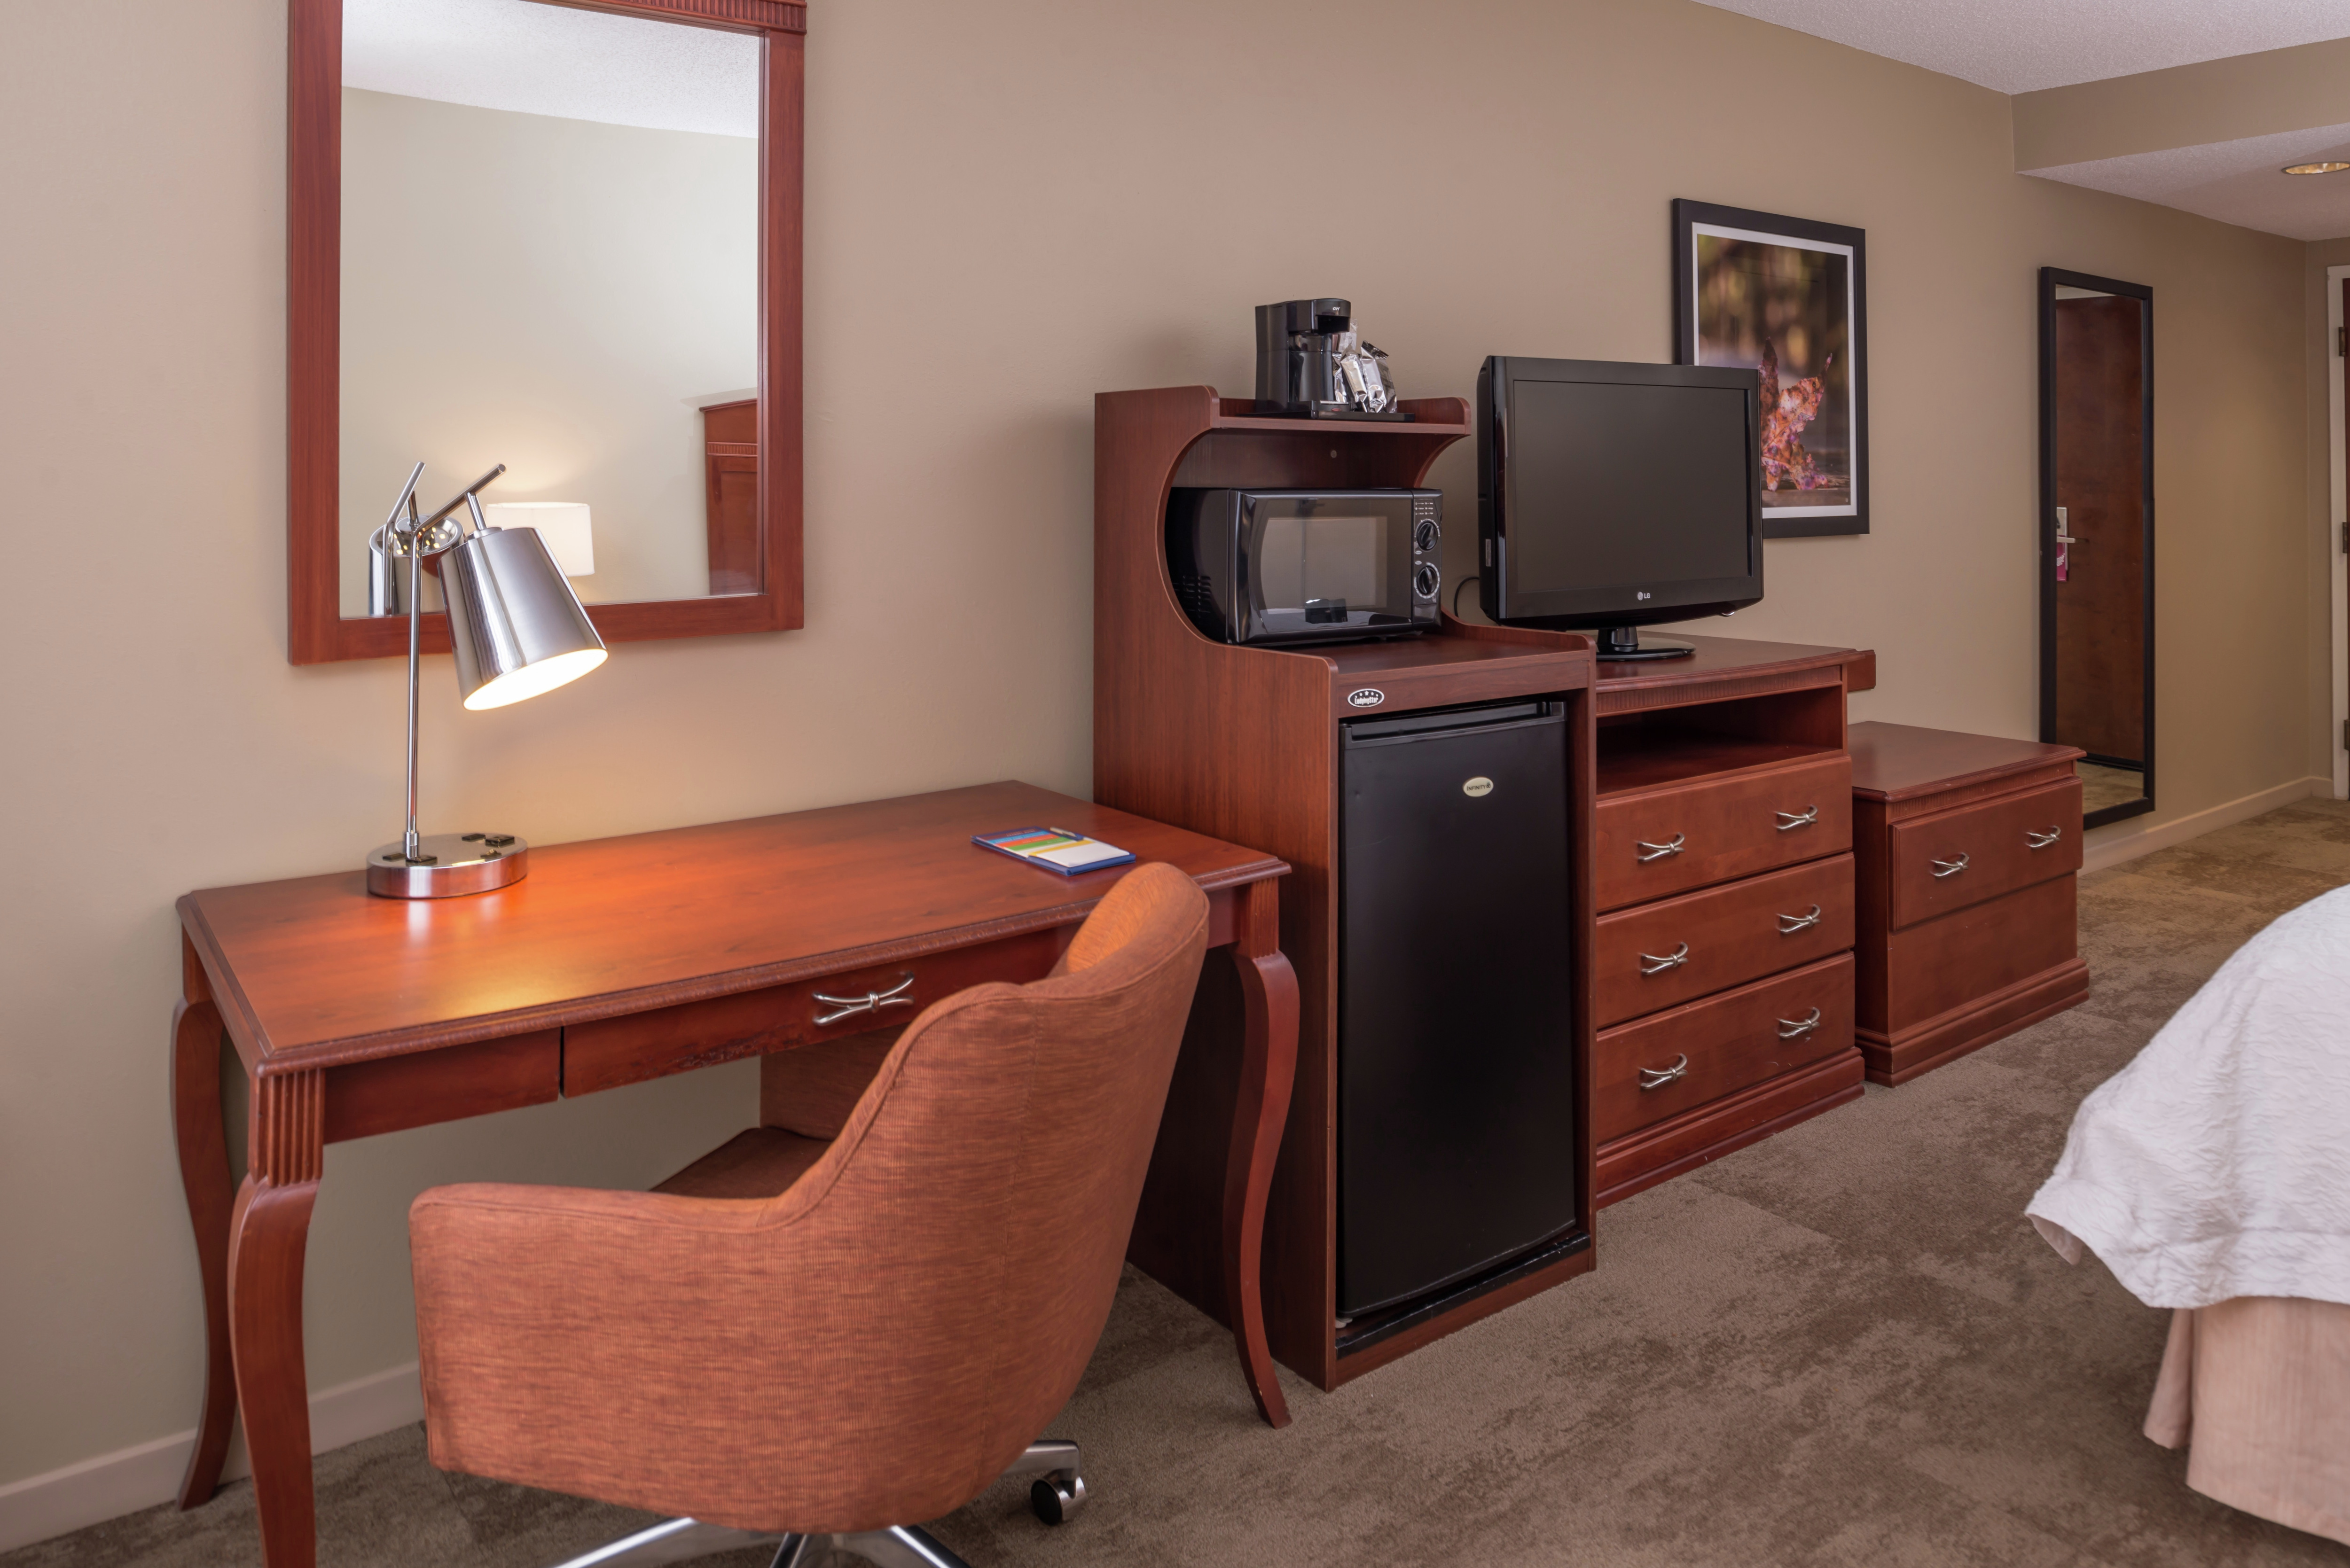 King Bed, Work Desk, Hospitality Center With Microwave and Mini Fridge, TV, and Full Length Mirror in Guest Room